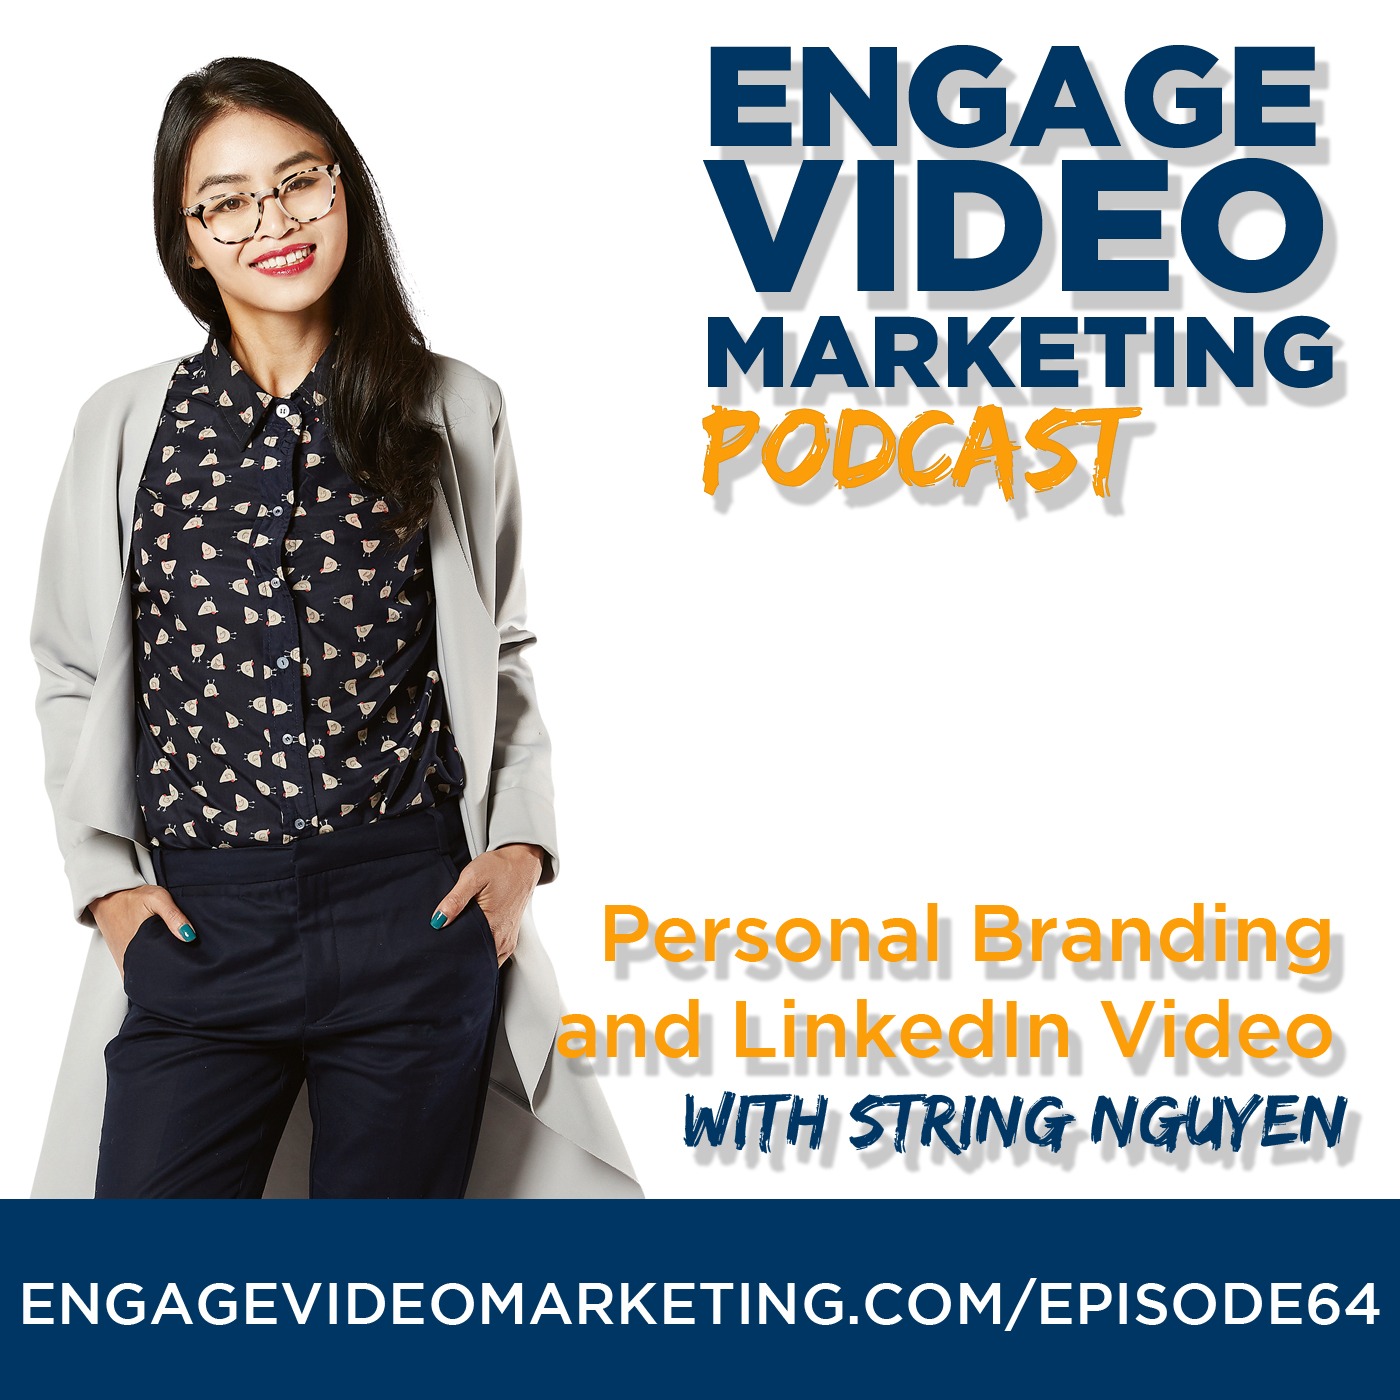 Personal Branding and LinkedIn Video with String Nguyen